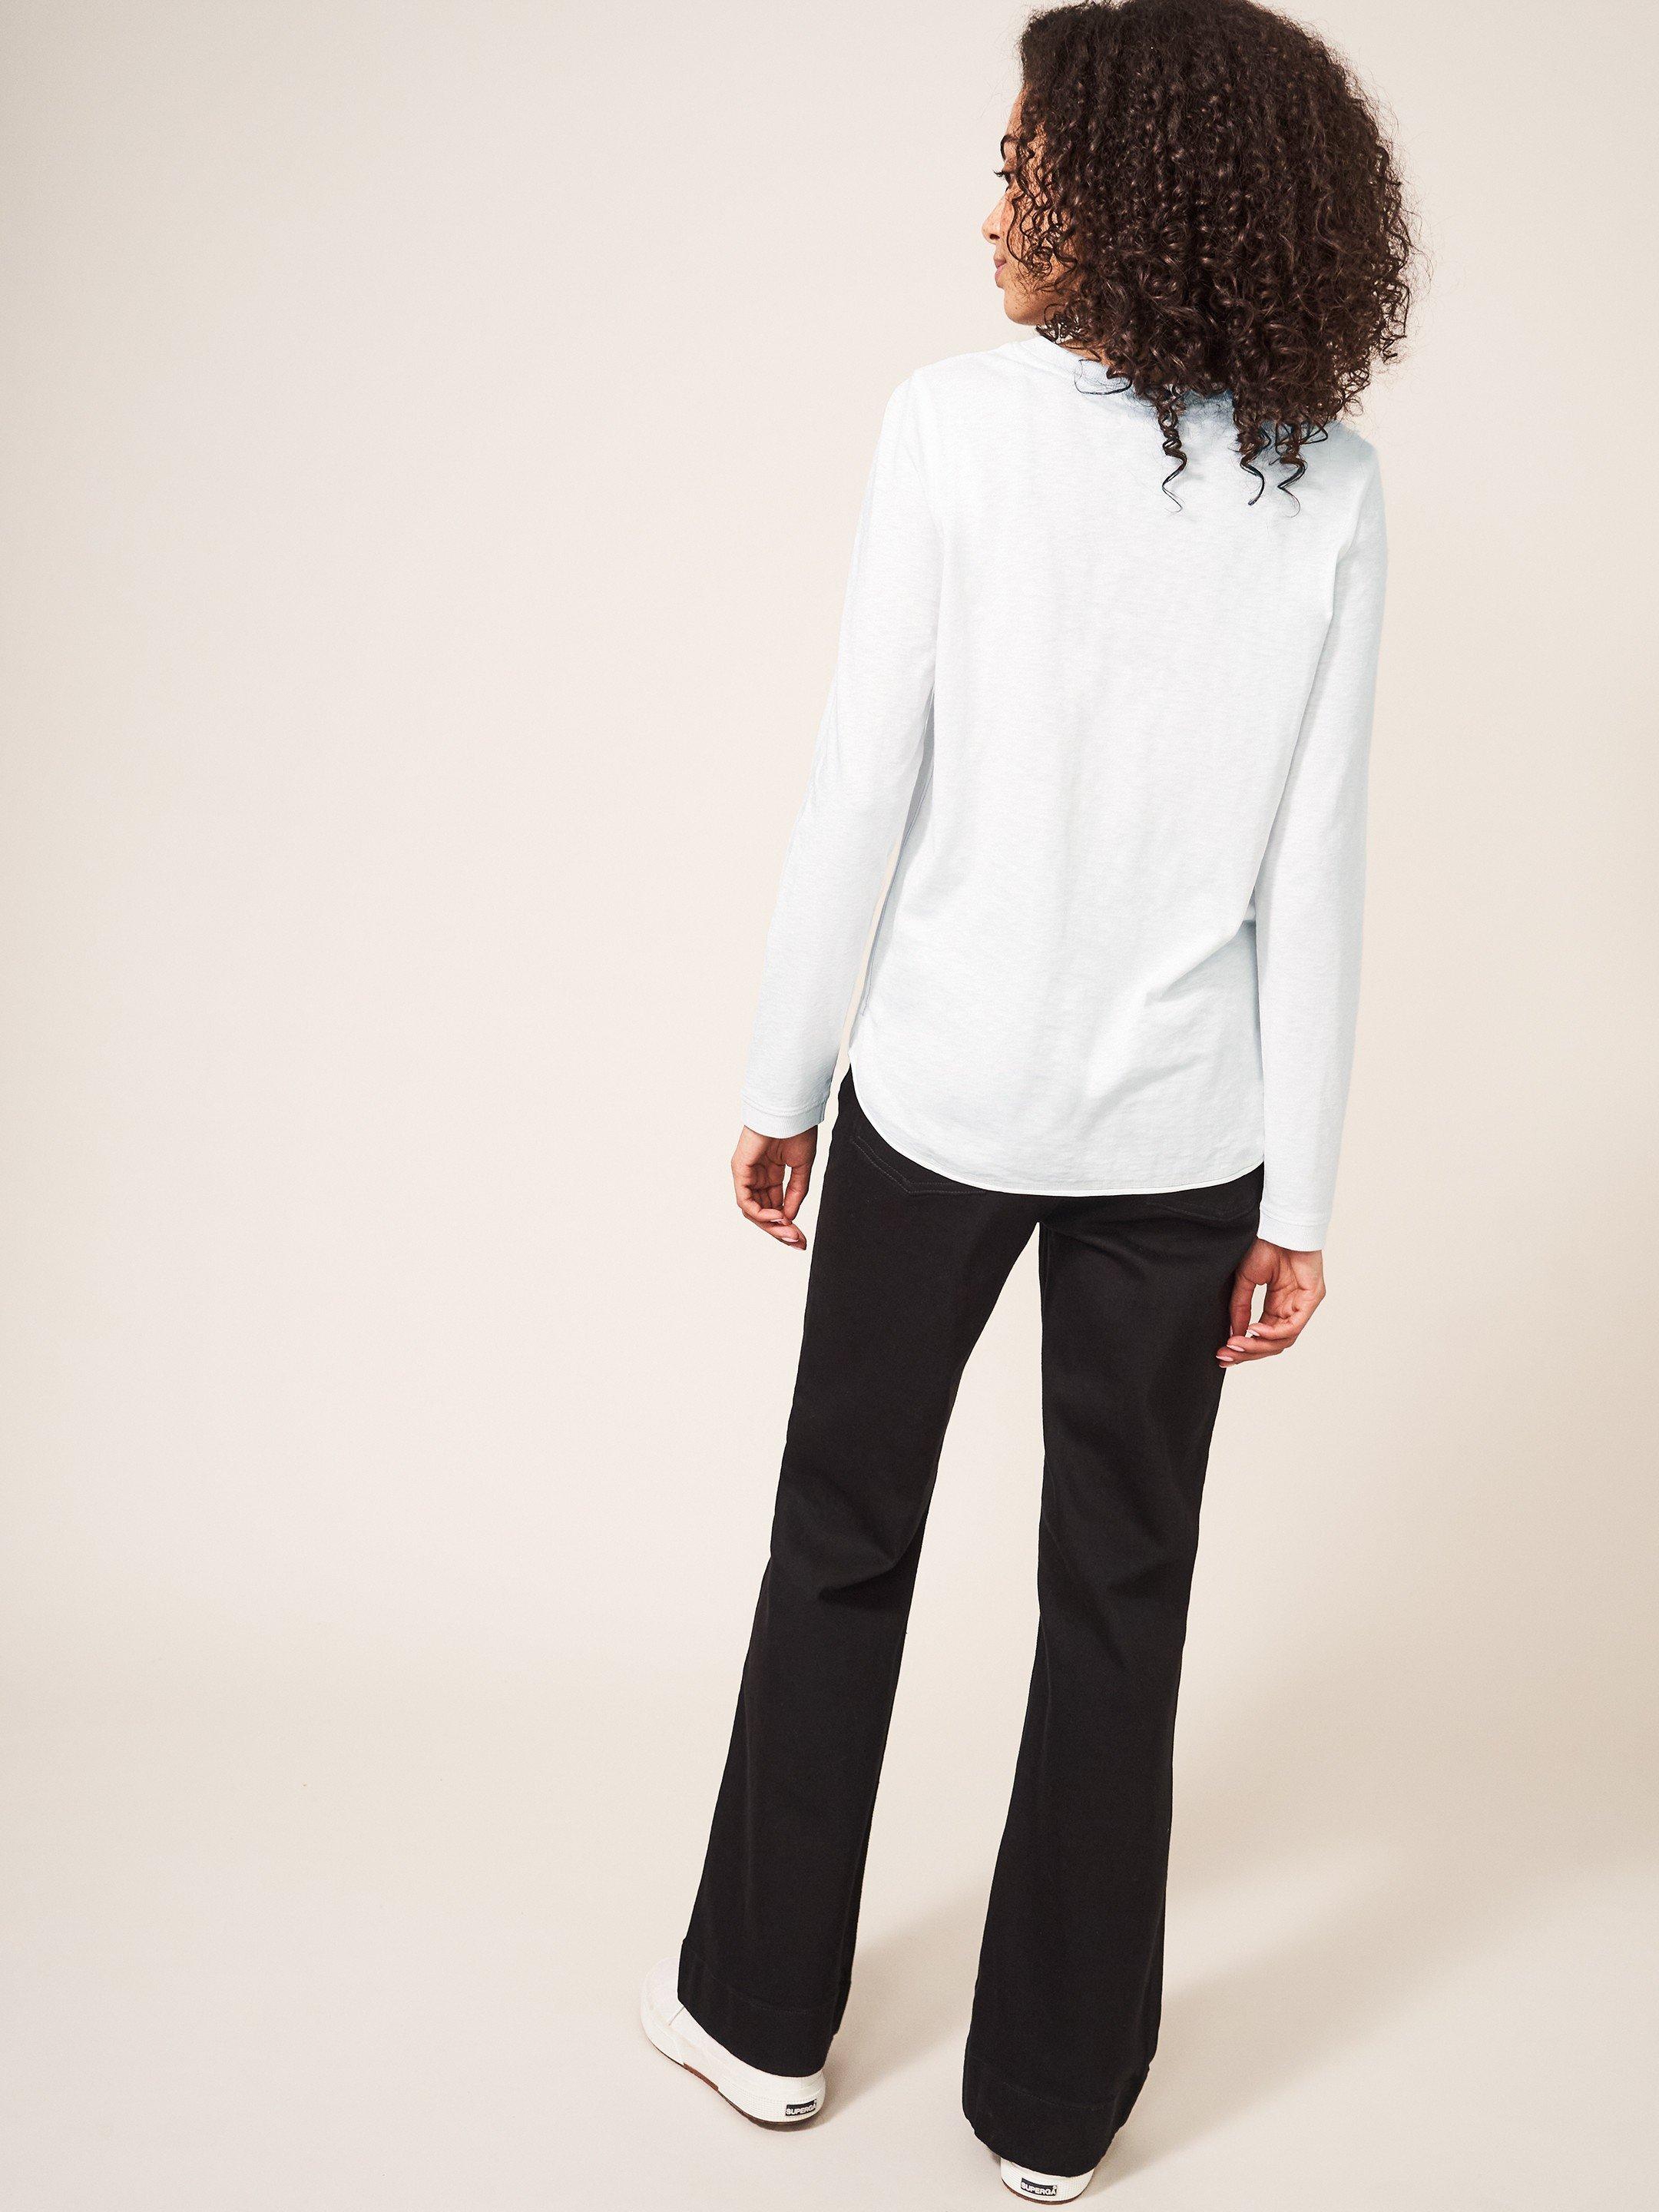 Cassie Crew Tee in PALE IVORY - MODEL BACK